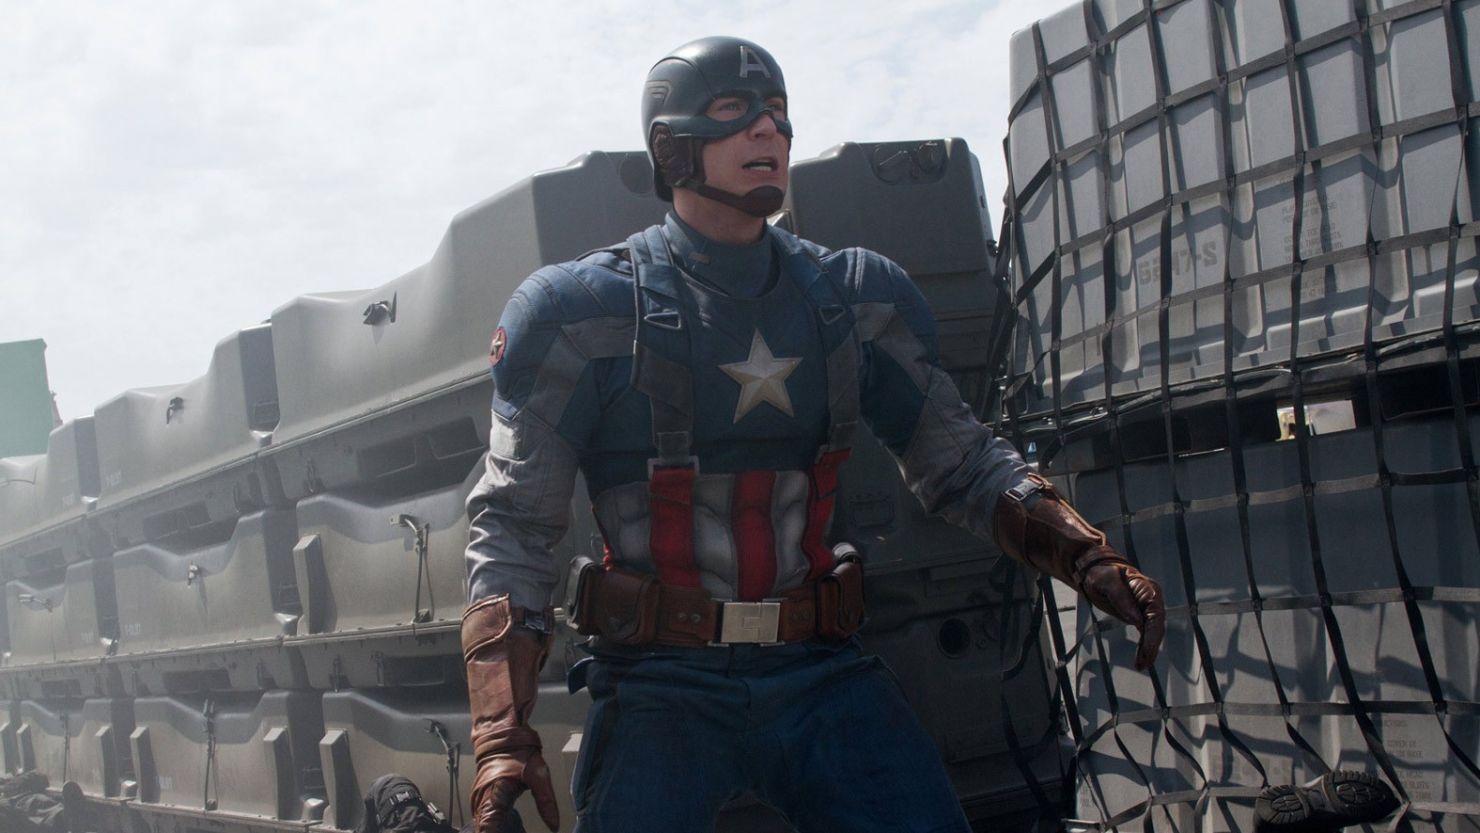 Chris Evans' Captain America suits up again in the 2014 sequel "Captain America: The Winter Soldier."